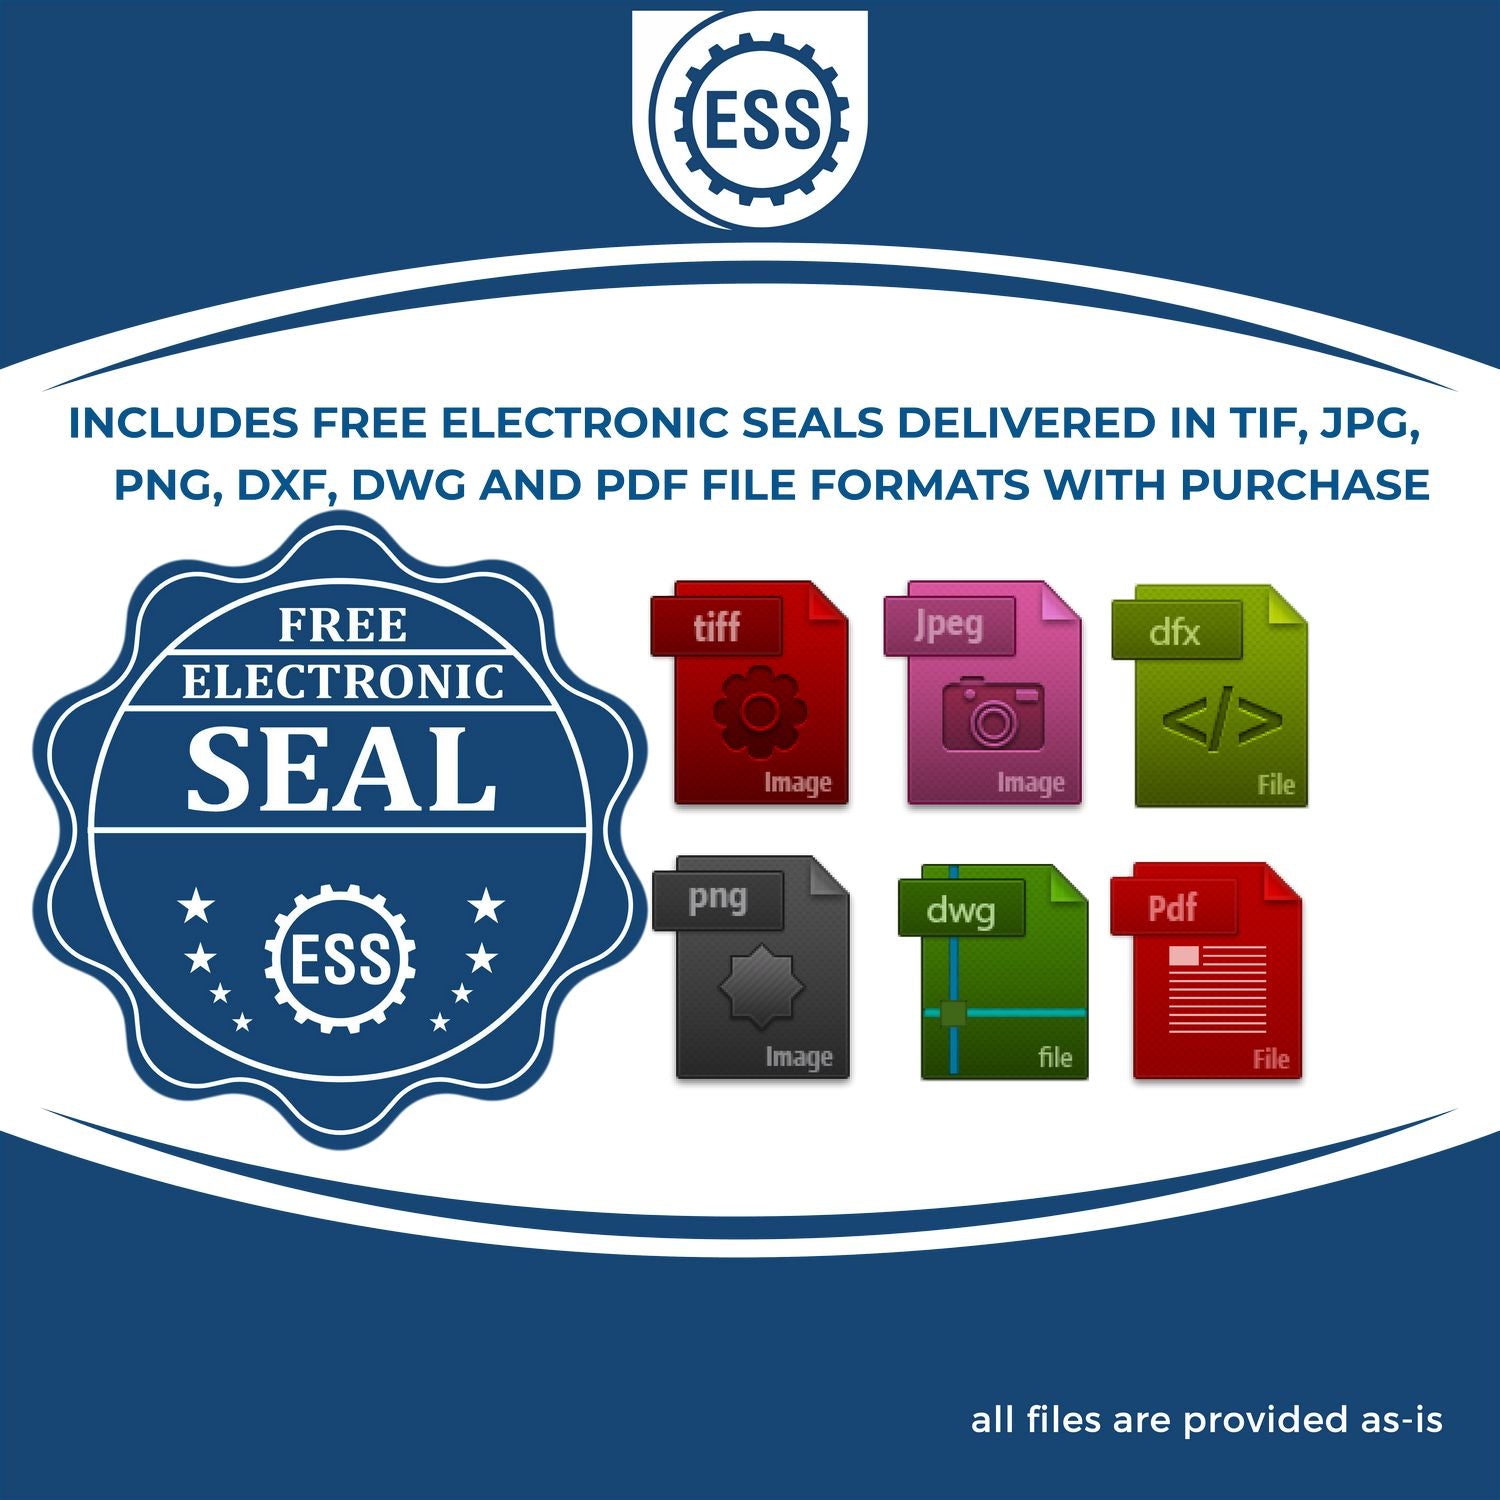 An infographic for the free electronic seal for the Extended Long Reach Virginia Surveyor Embosser illustrating the different file type icons such as DXF, DWG, TIF, JPG and PNG.